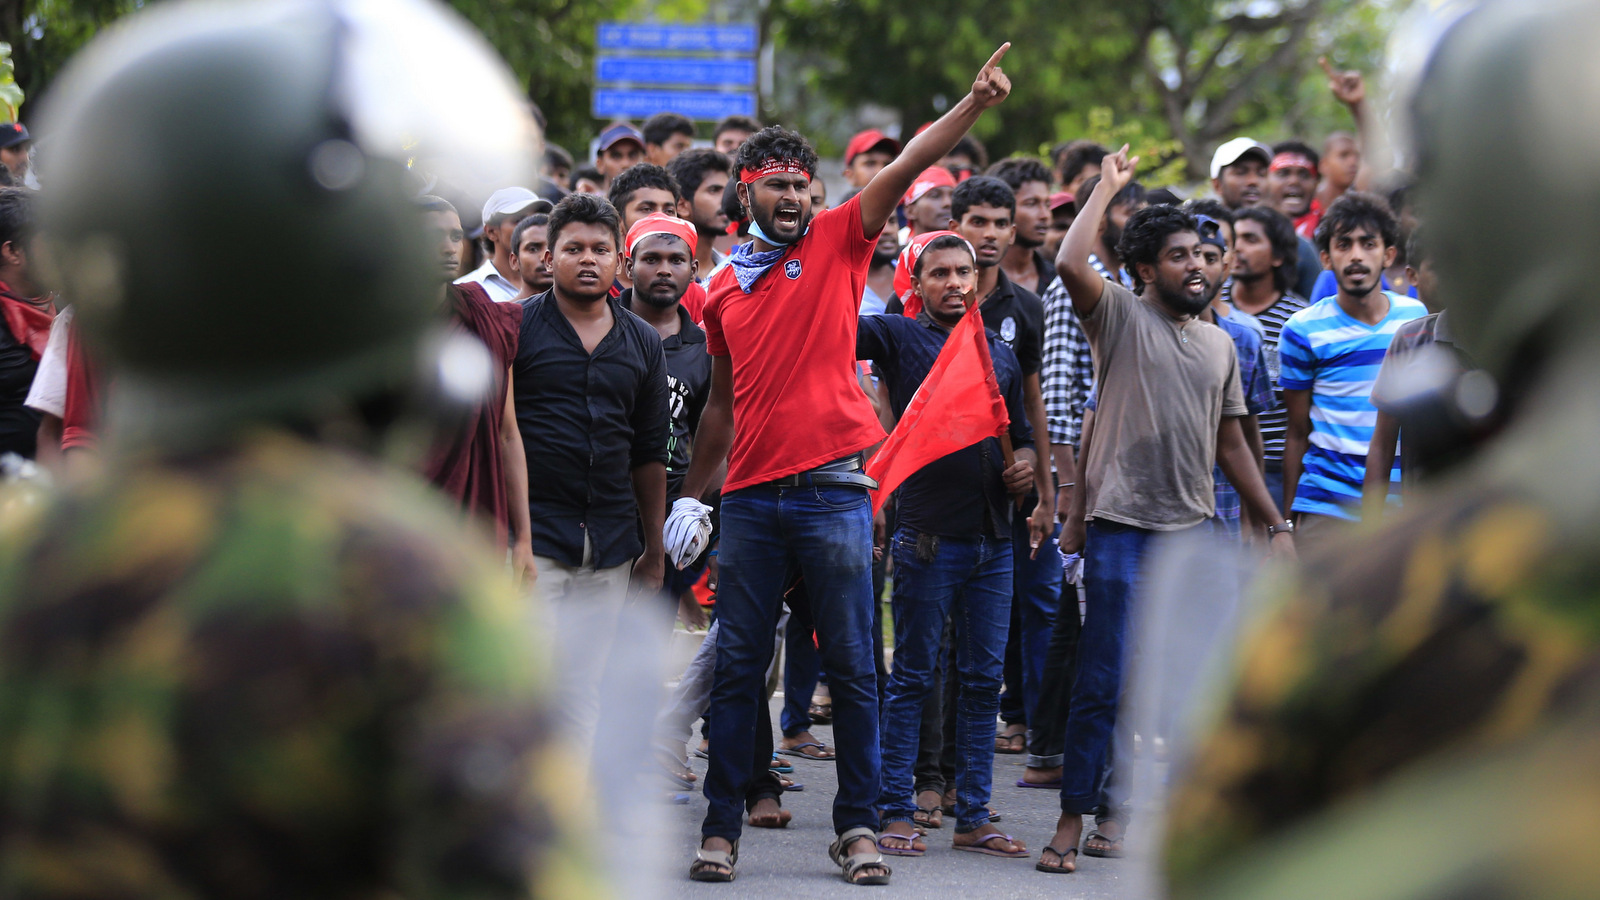 Sri Lankan university students parade shouting anti government slogans during a protest in Colombo, Sri Lanka, Wednesday, May 17, 2017. Police fired tear gas at thousands of students protesting against a private medical university they say could jeopardize the nation's tradition of state-funded education. (AP/Eranga Jayawardena)